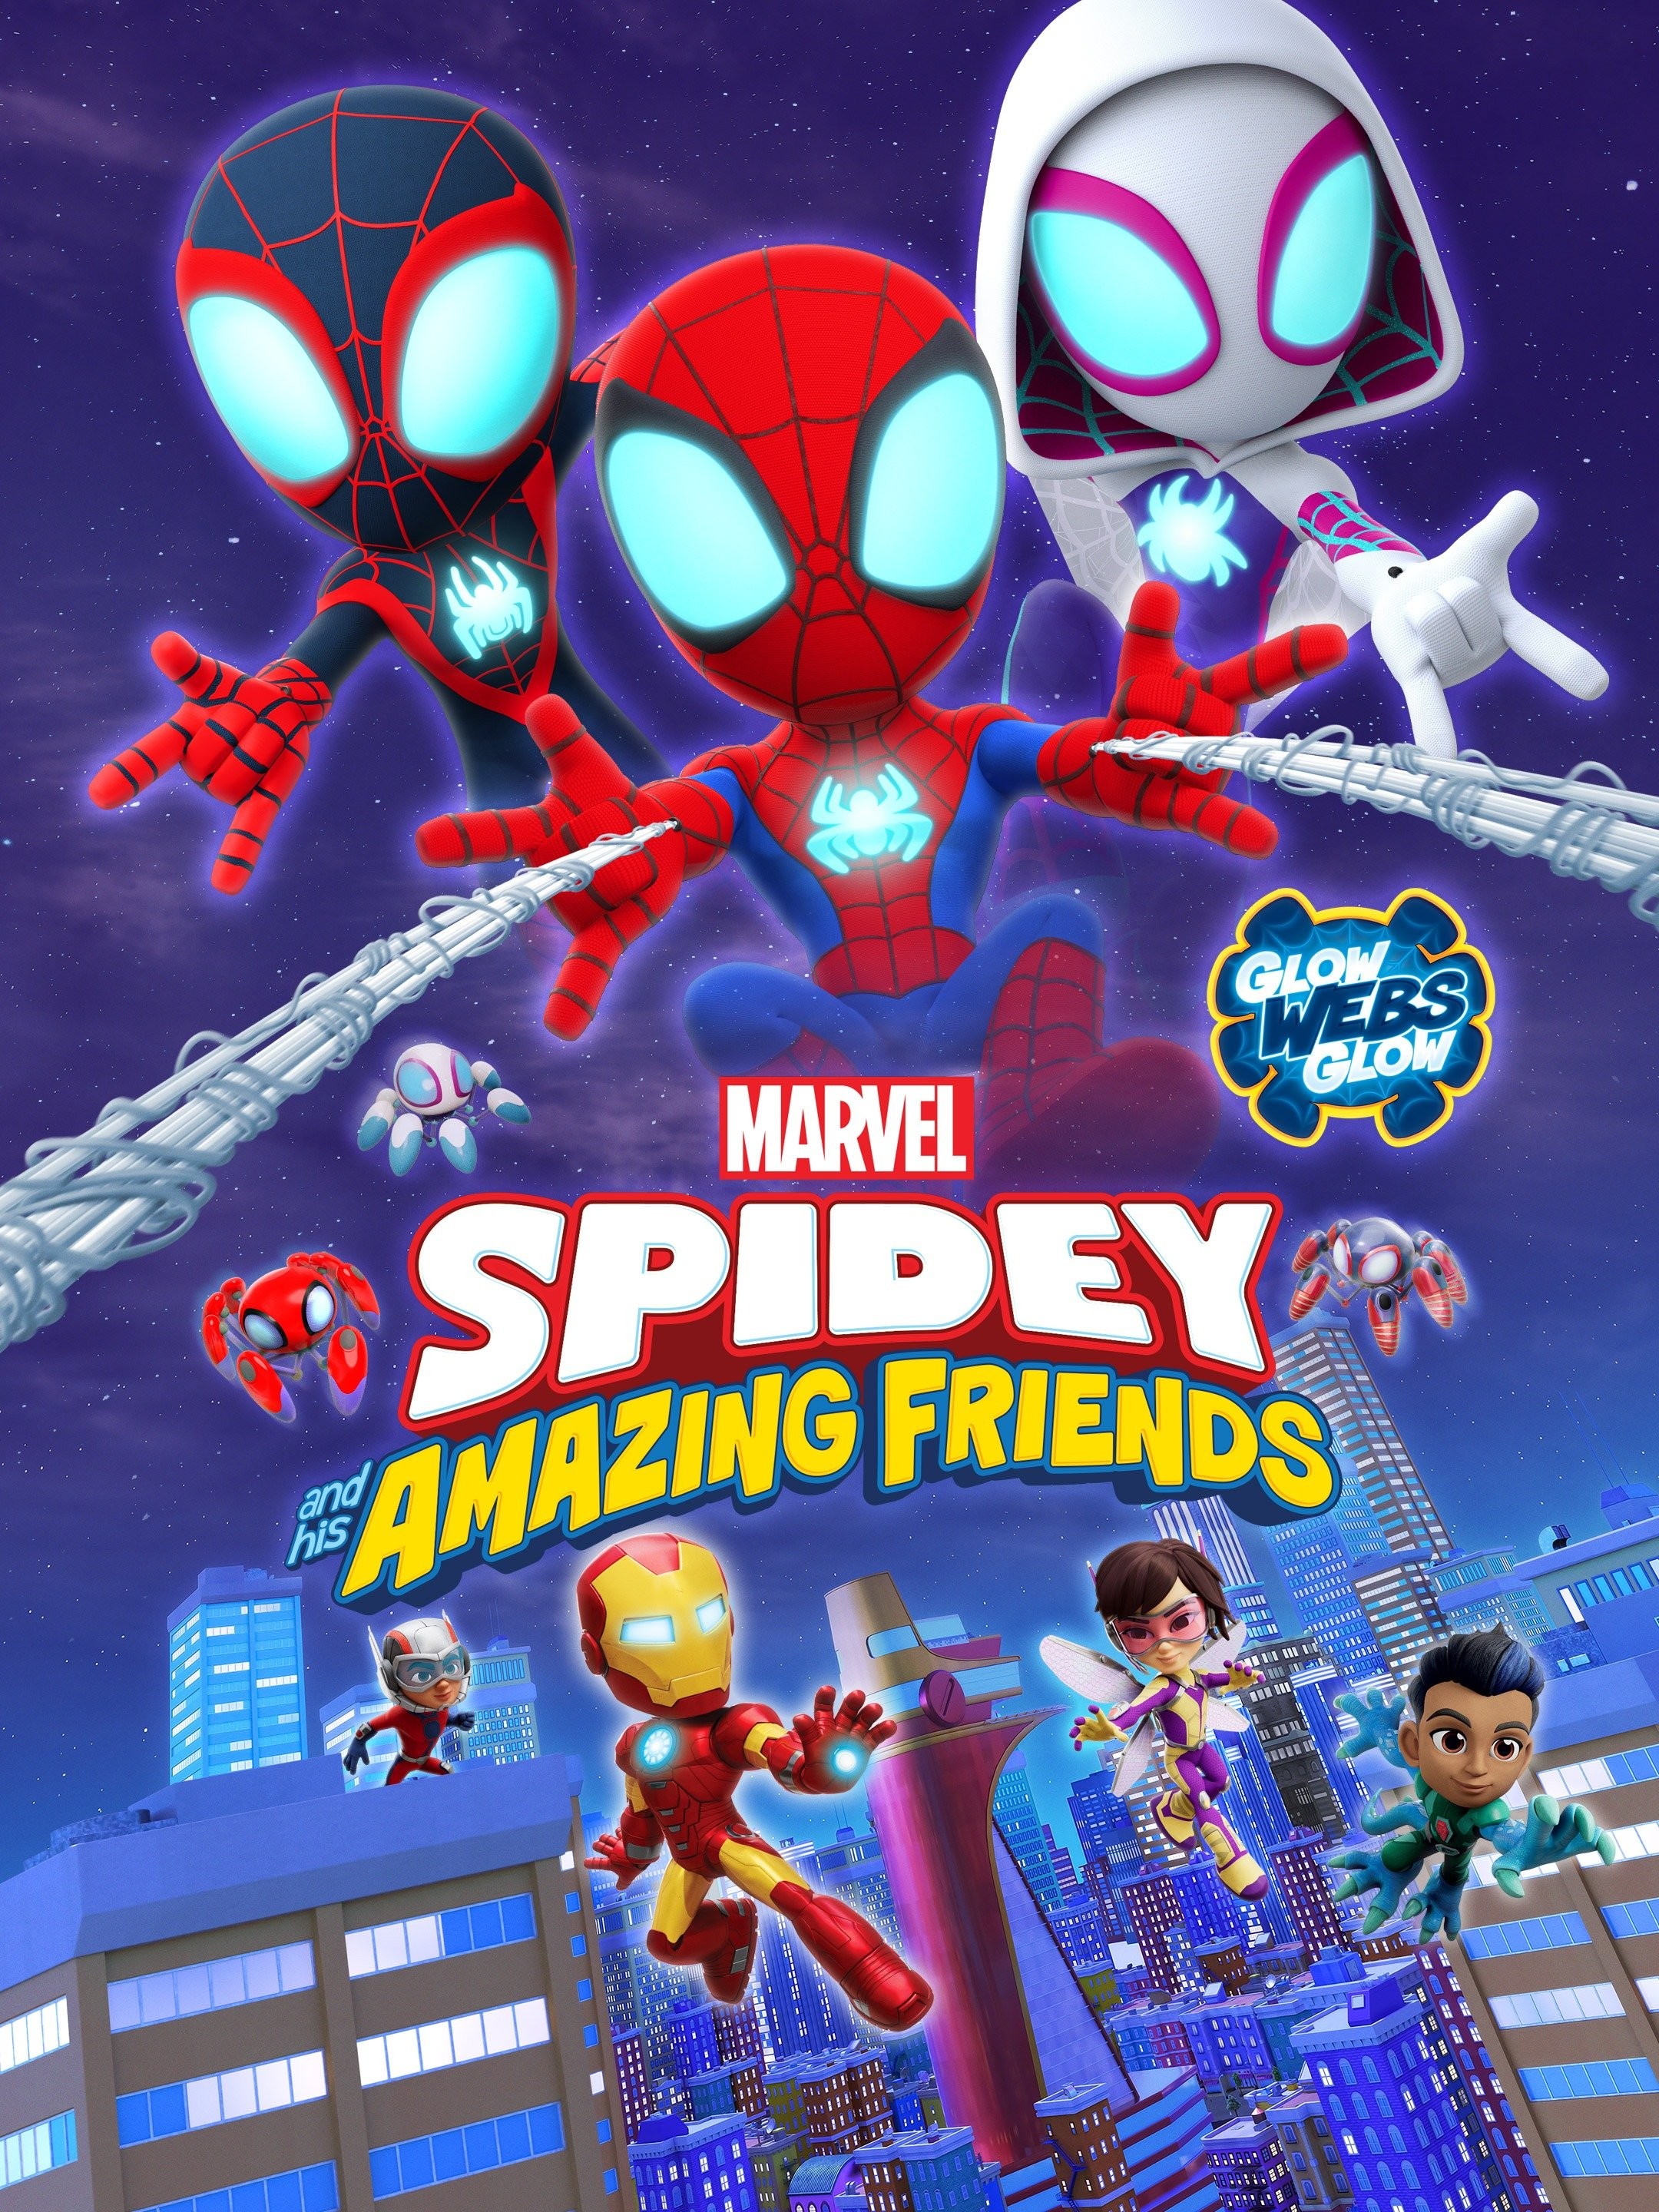 Spidey and His Amazing Friends Interactive Book for Toddlers – eKids